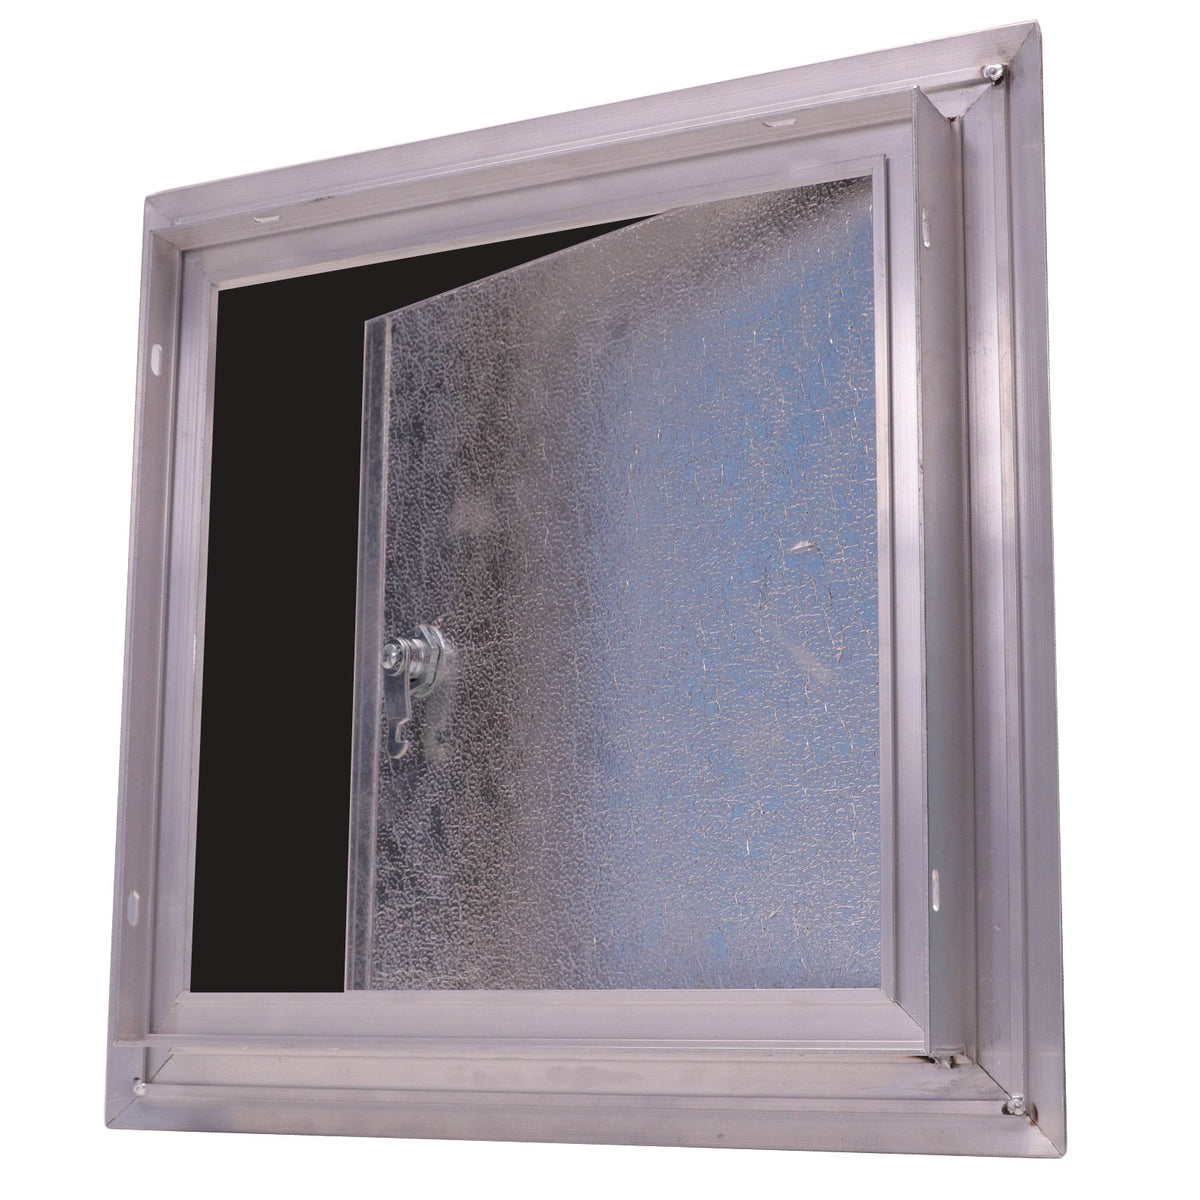 24&quot; X 24&quot; Aluminum Color Insulated Fire Rated Access Panel Door For Wall / Ceiling Application (Lock and Key) With Frame - [Outer Dimensions: 25&quot; Width X 25&quot; Height]